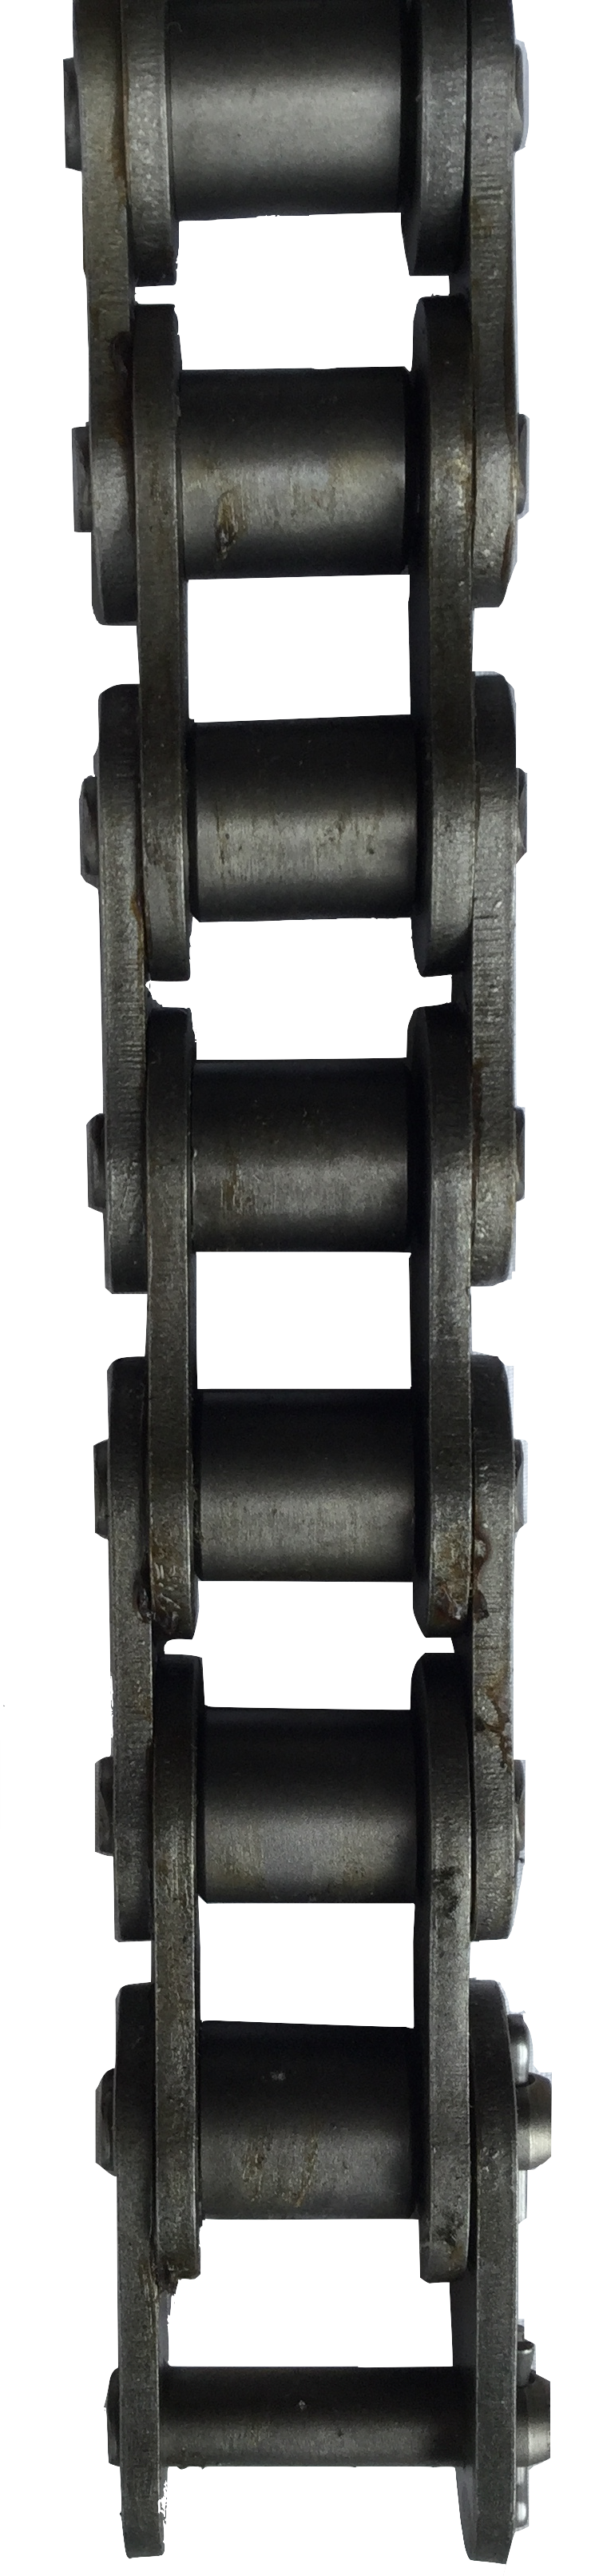 HKK #120 Standard Riveted Roller Chain (1.500" Pitch) - SOLD BY THE FOOT - Froedge Machine & Supply Co., Inc.